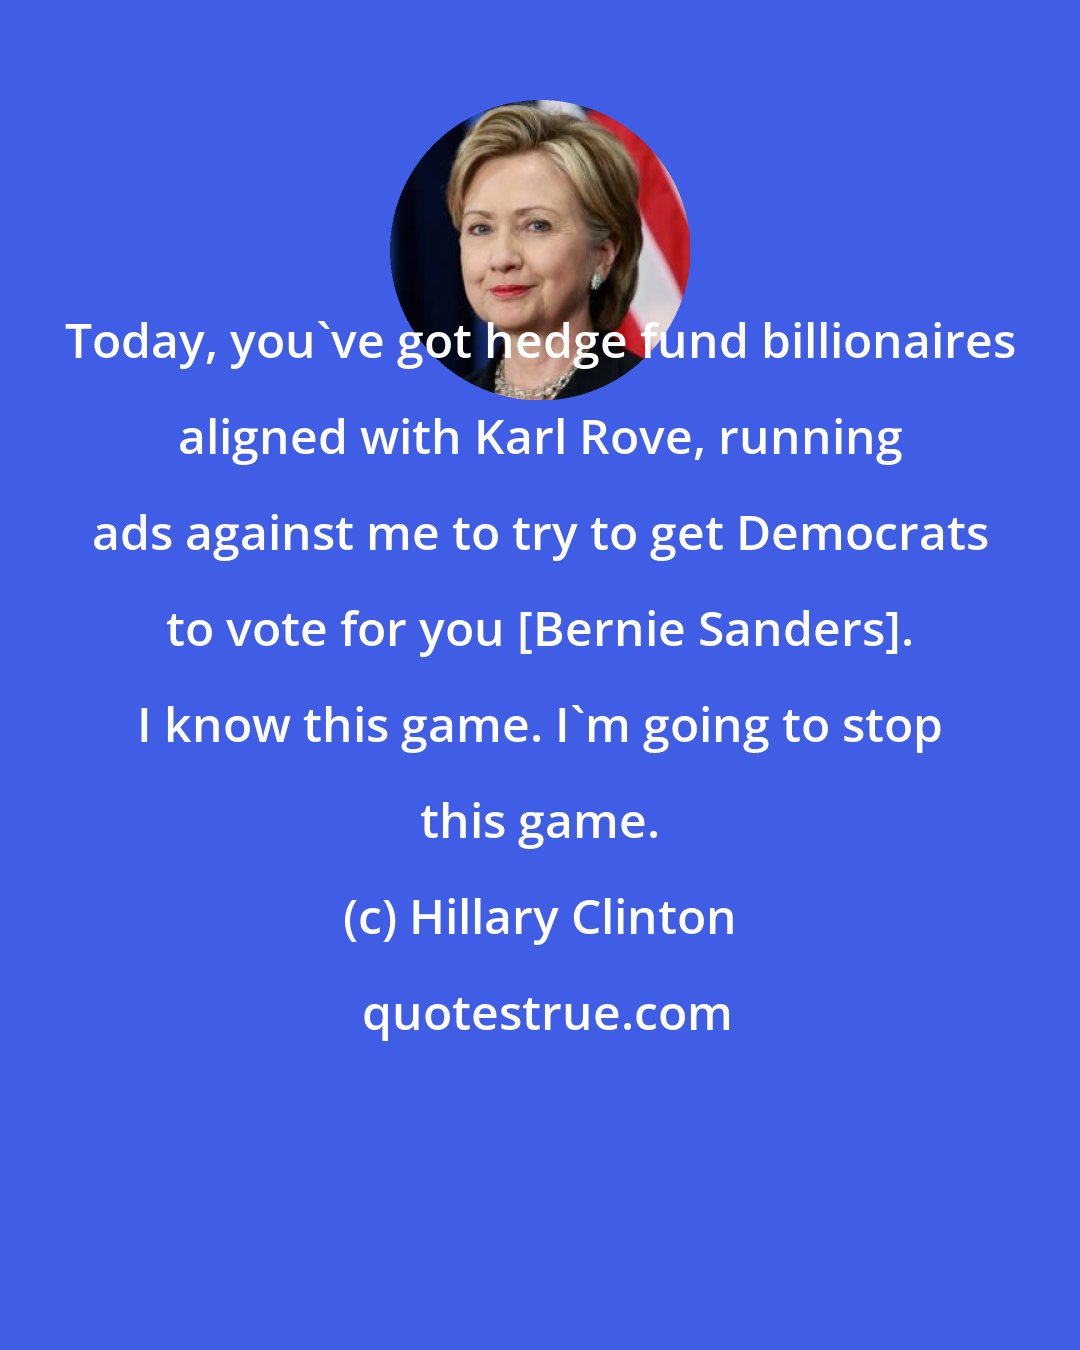 Hillary Clinton: Today, you've got hedge fund billionaires aligned with Karl Rove, running ads against me to try to get Democrats to vote for you [Bernie Sanders]. I know this game. I'm going to stop this game.